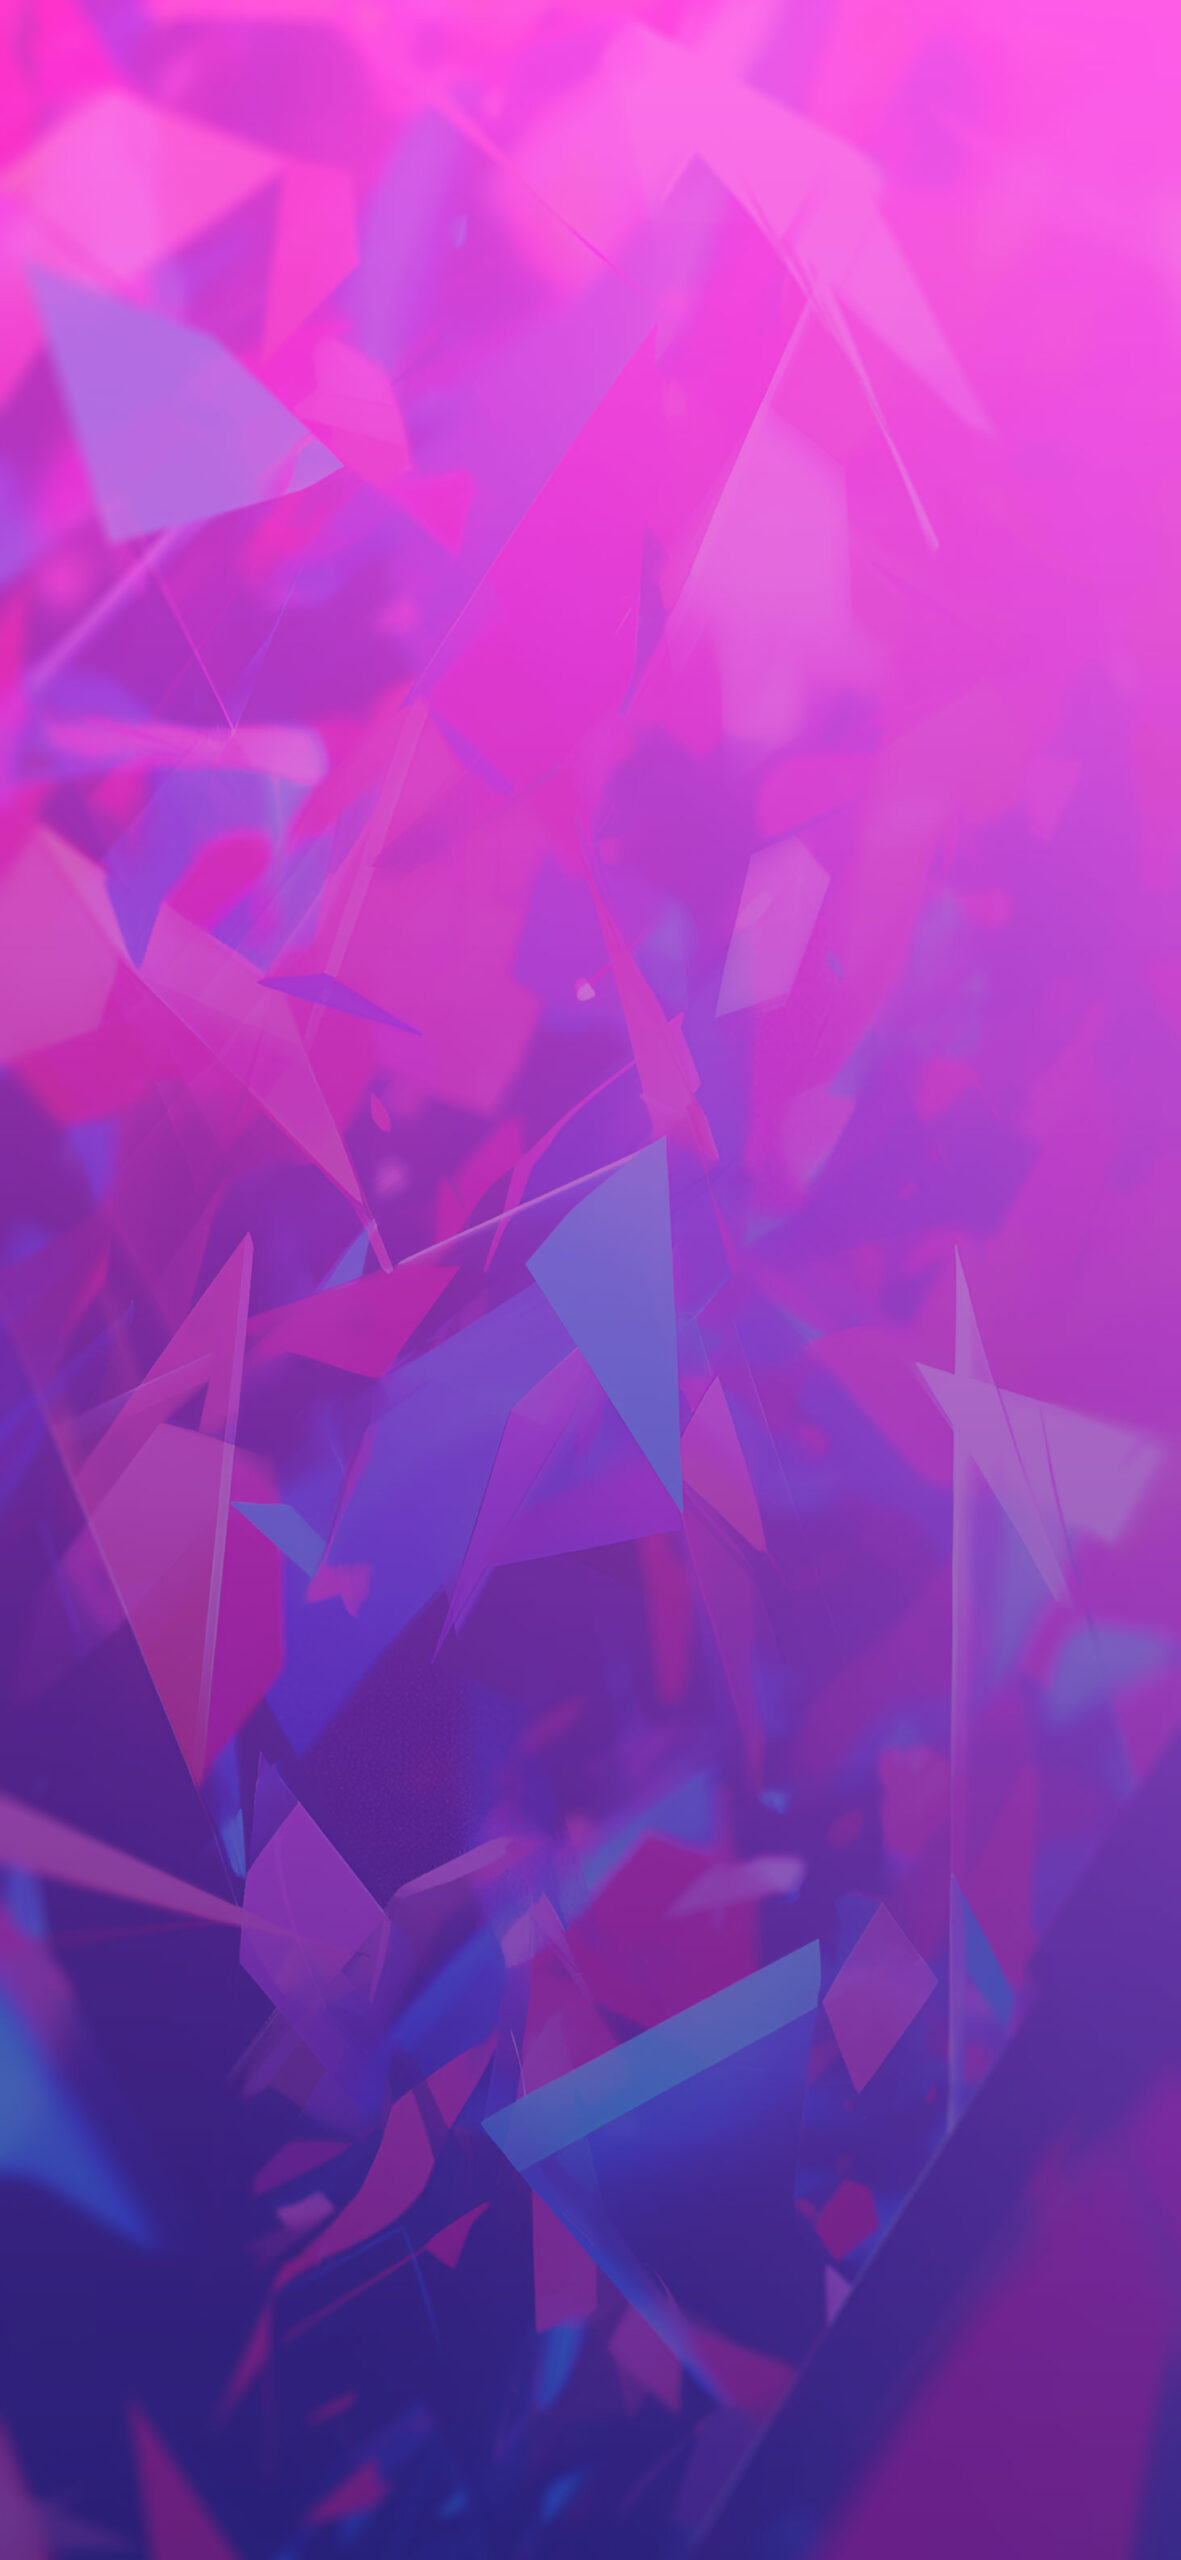 Purple & blue crystals abstract wallpaper High resolution abst